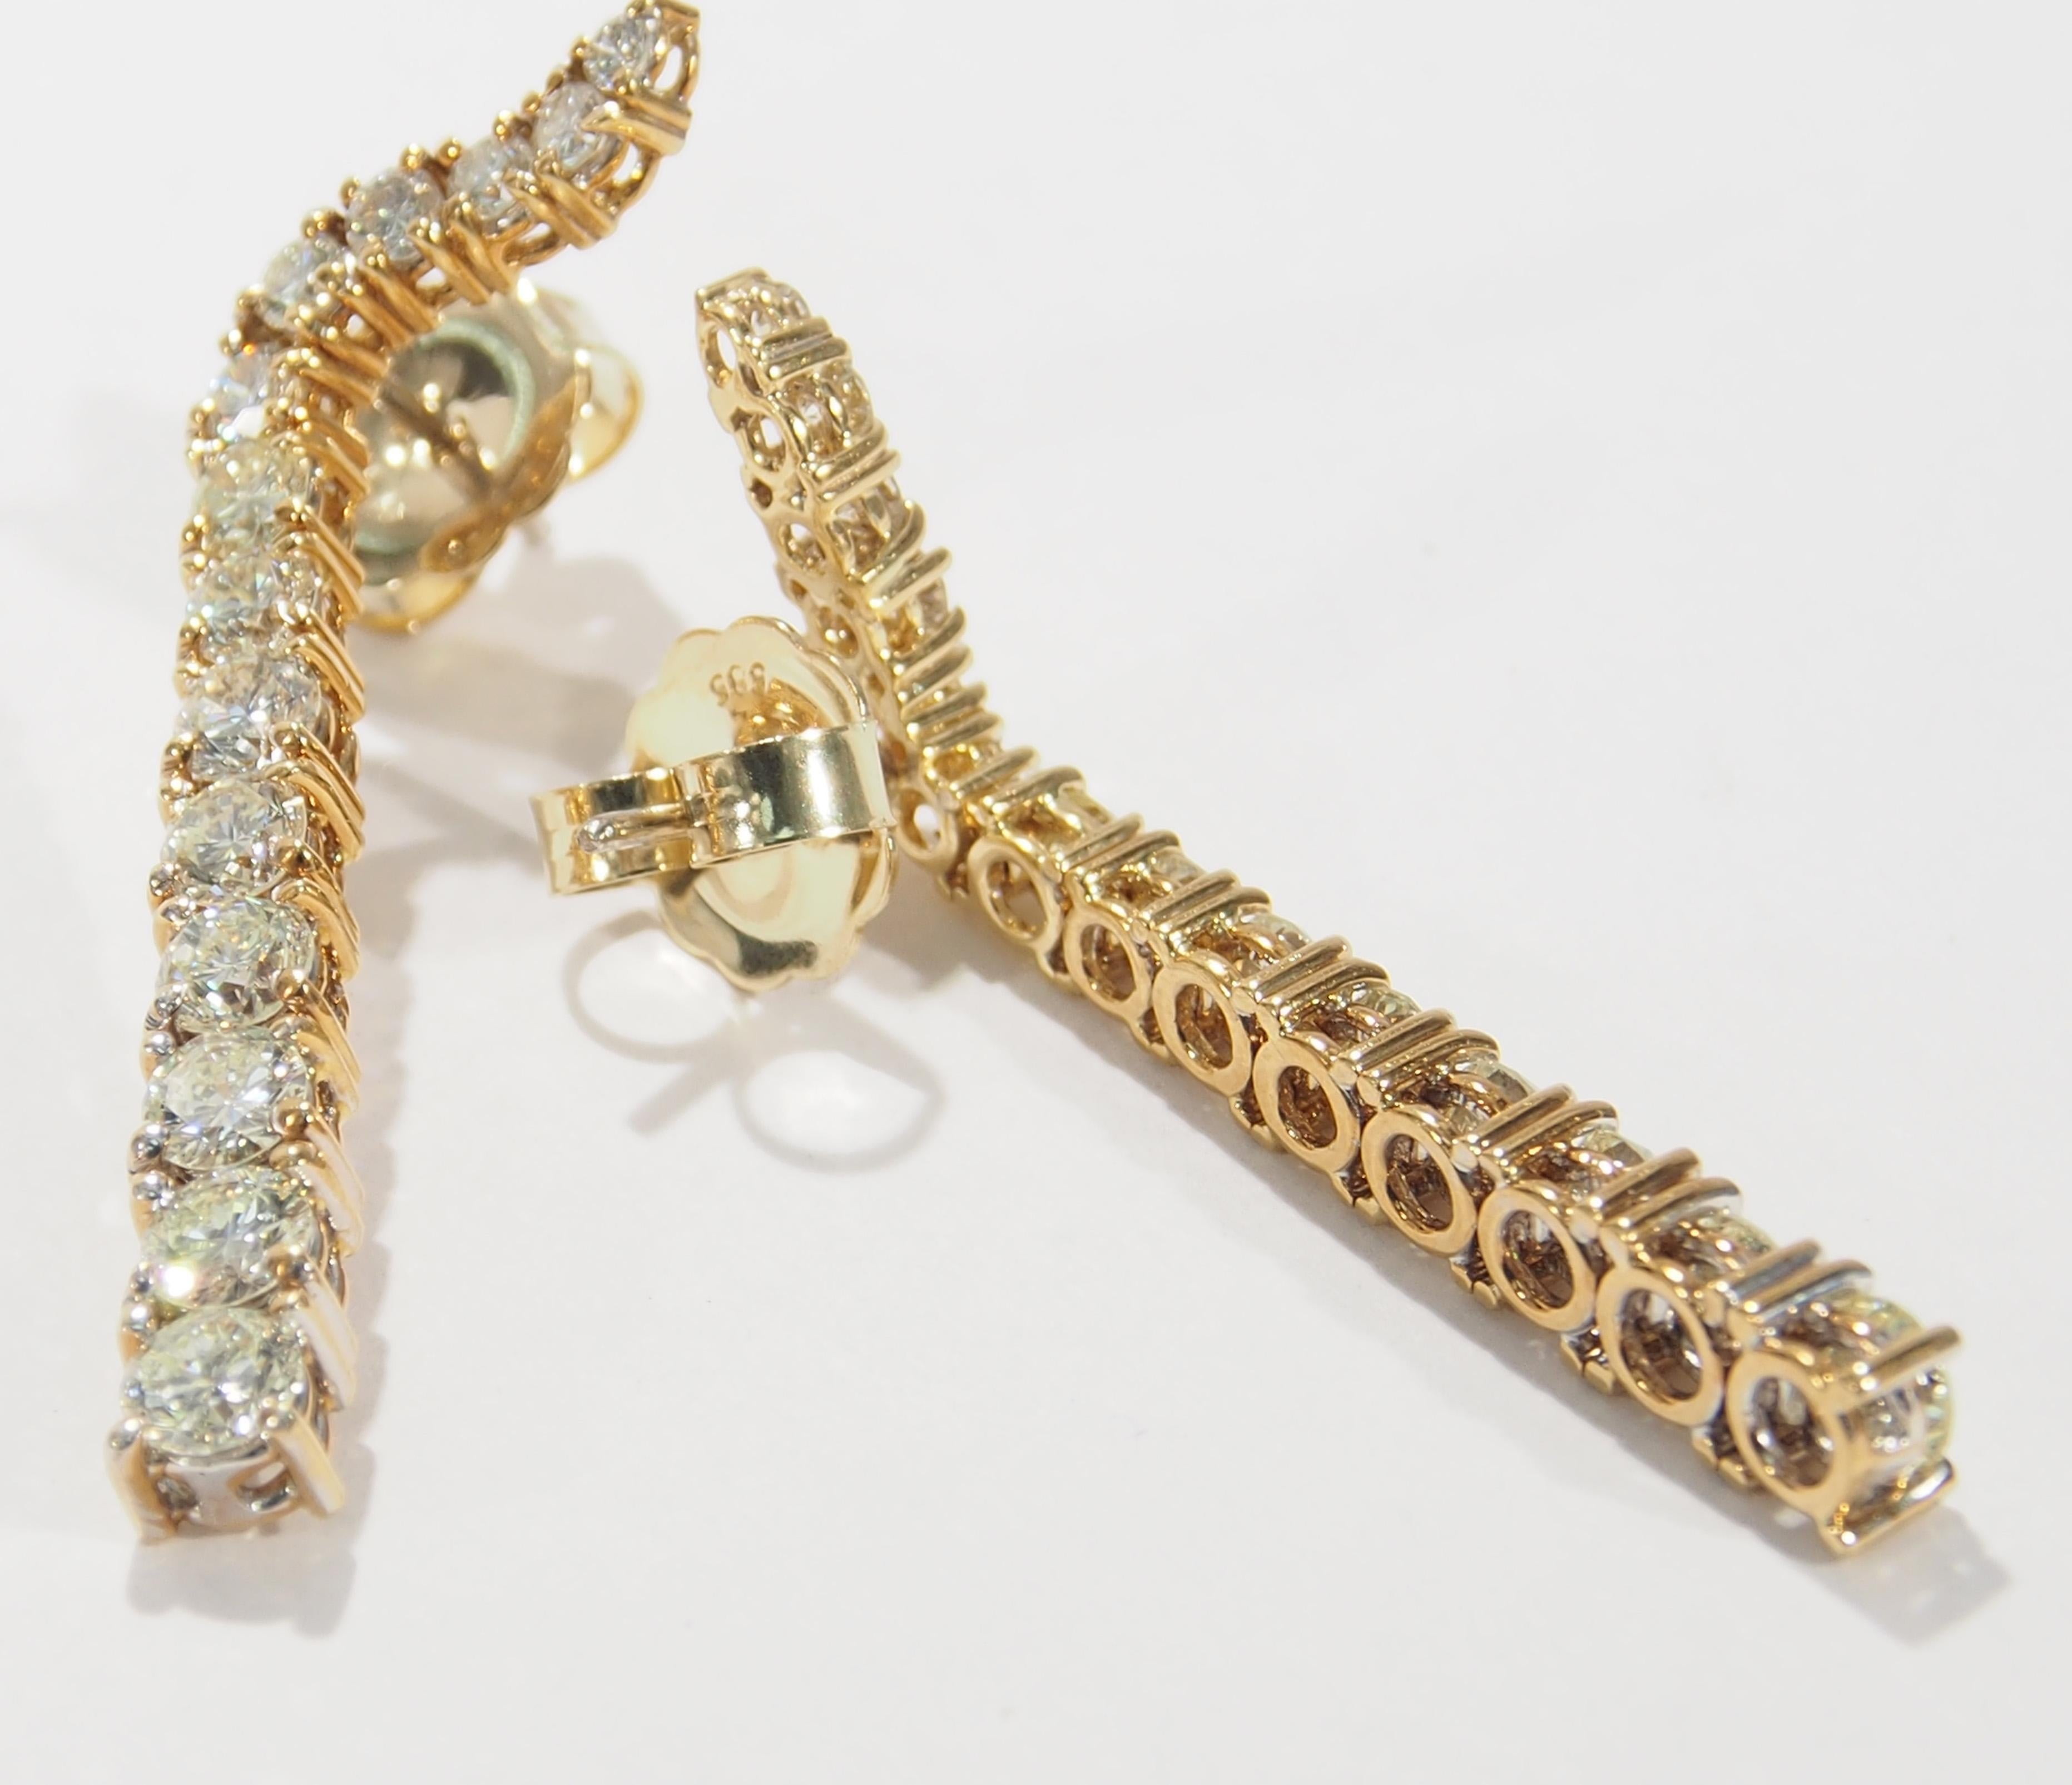 These are a delightful pair of 18K Yellow Gold Diamond Earrings. An intriguing design that begins with a slight curve up the ear down to end at a 1 1/2 inch length. There are (28) Round Brilliant Cut Diamonds, approximately 4.50ctw, J-L in Color, VS